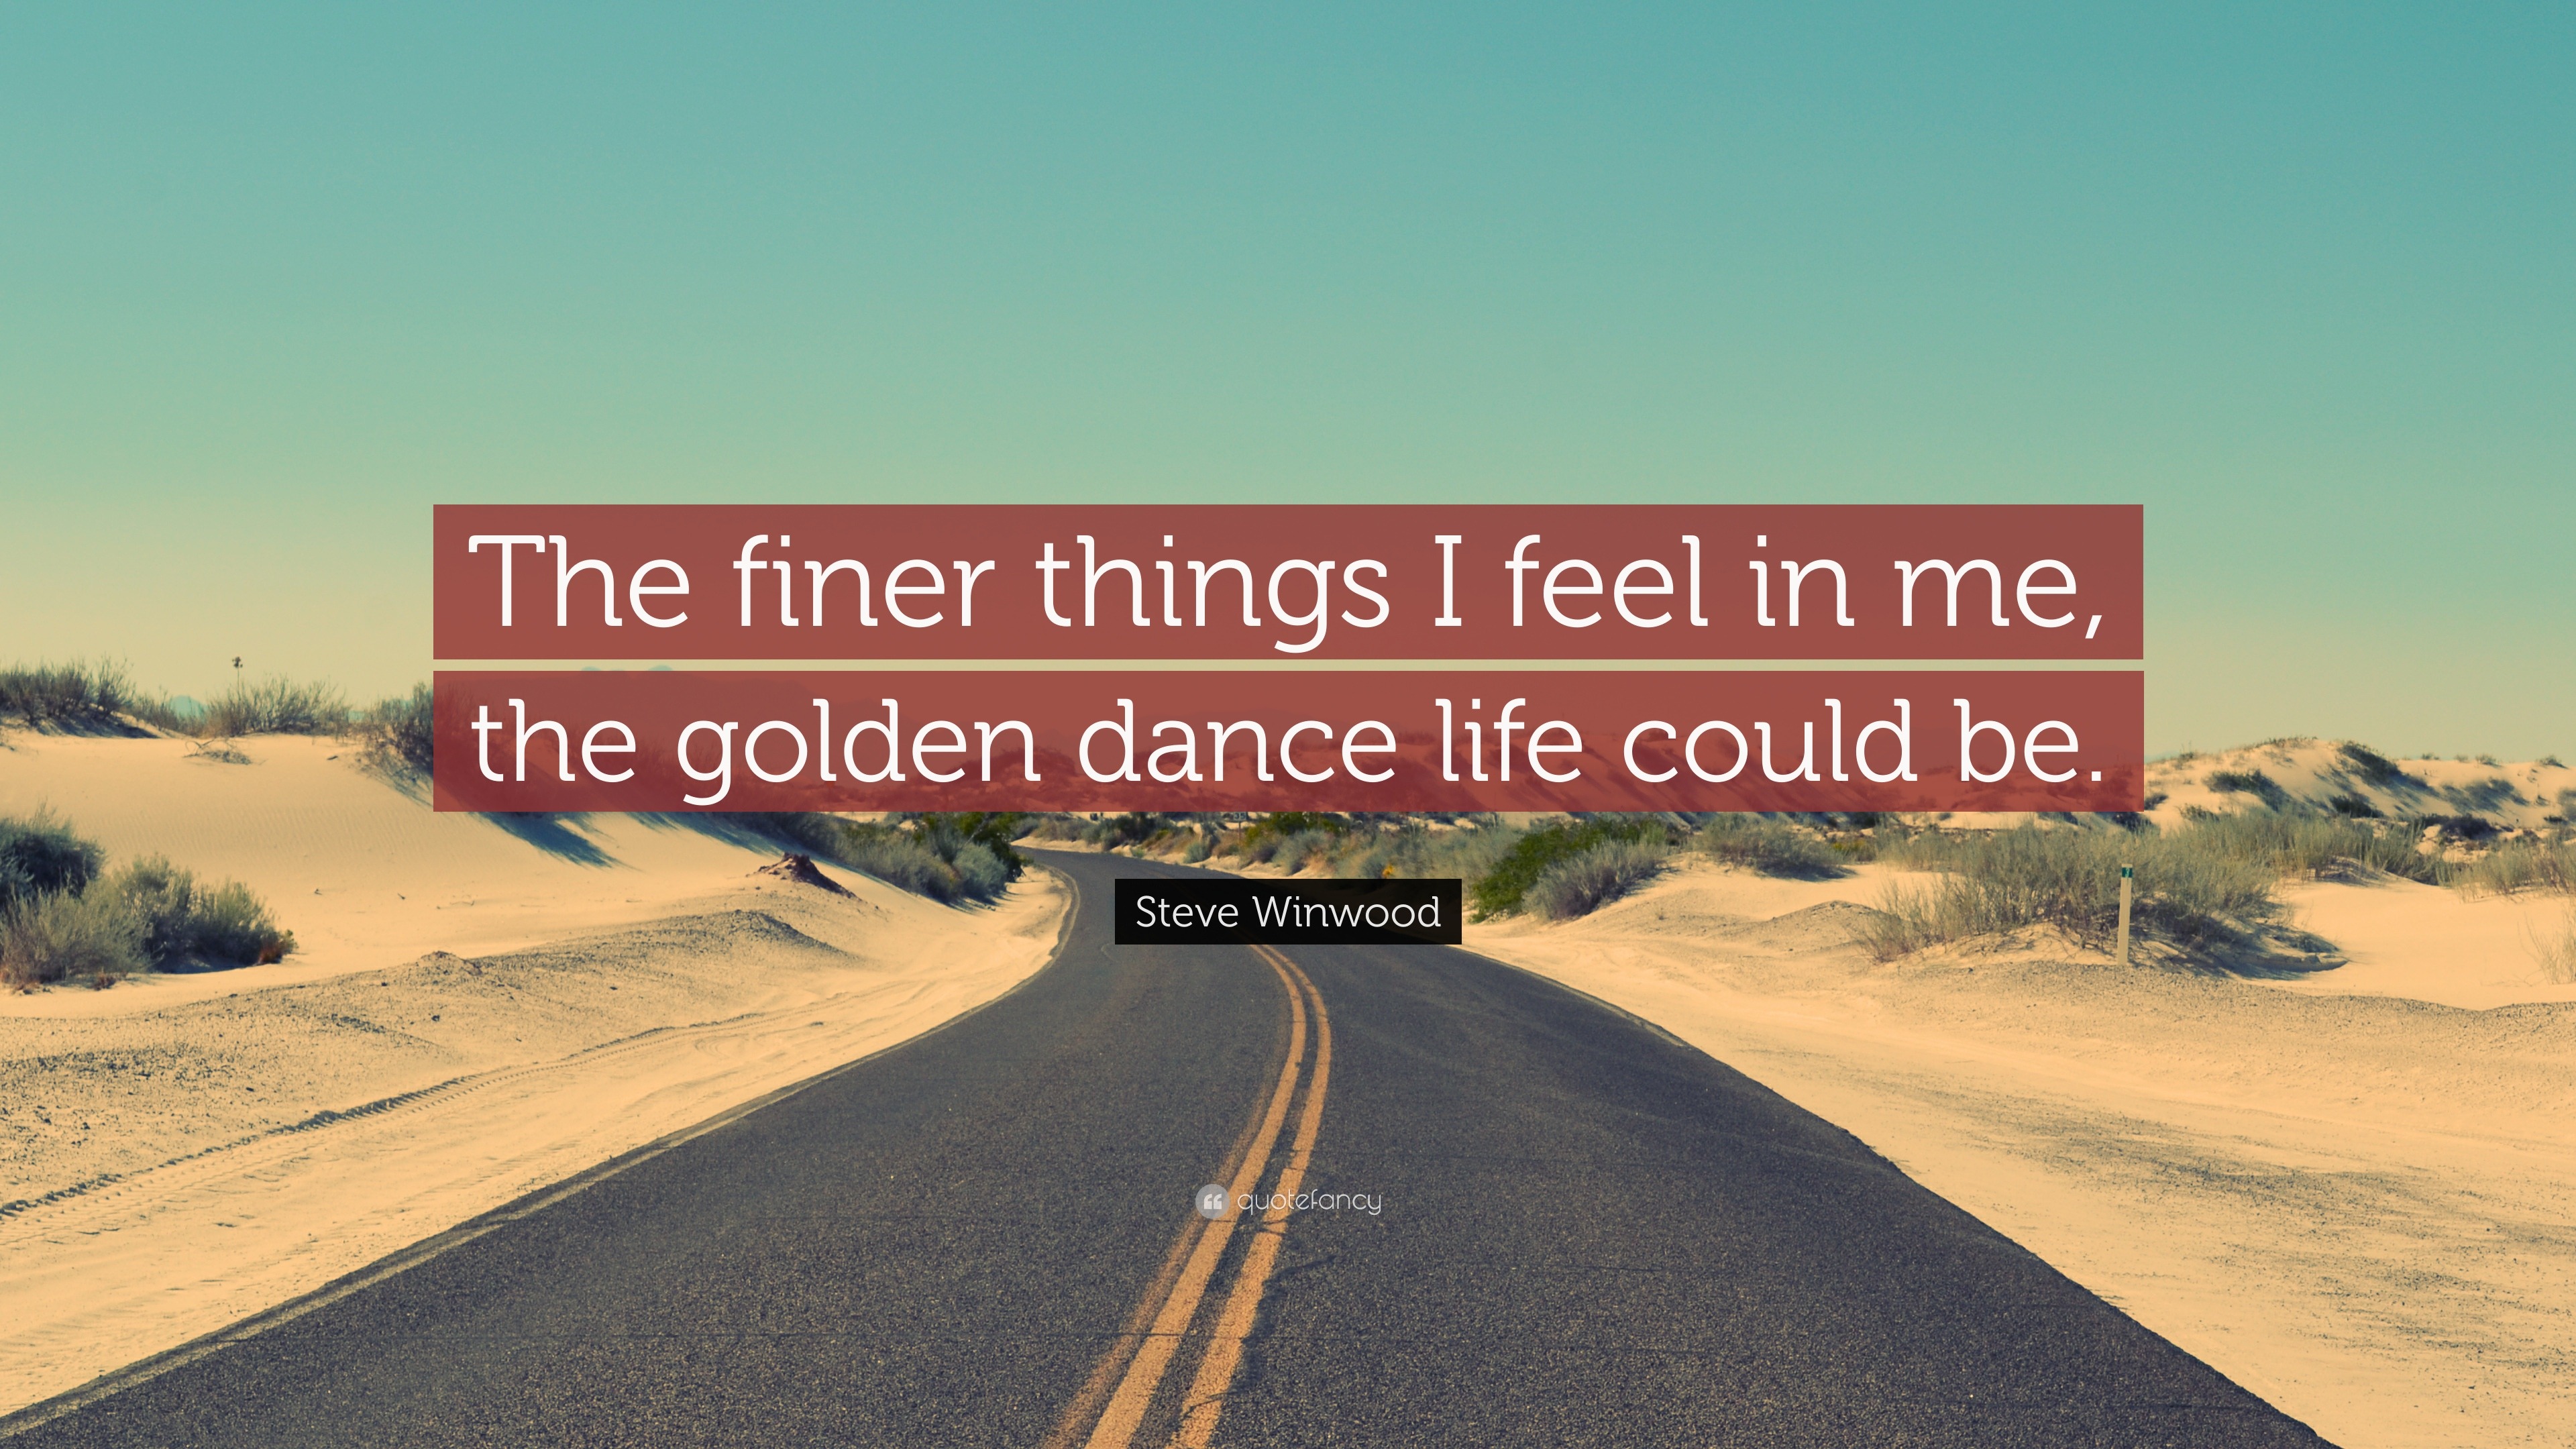 Steve Winwood Quote “The finer things I feel in me the golden dance